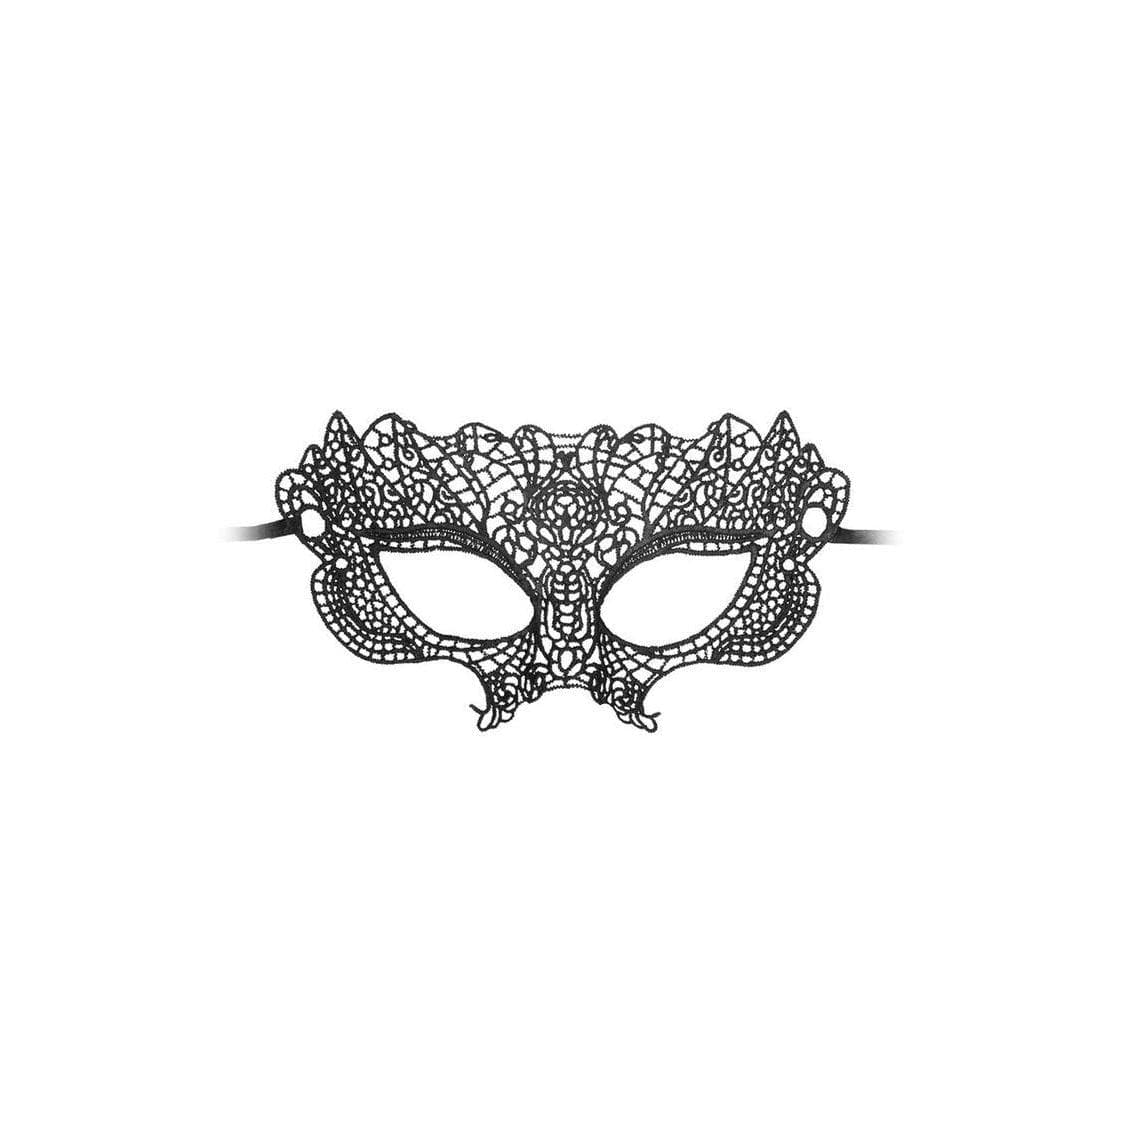 Ouch! Black & White Princess Lace Eye Mask Black - Romantic Blessings